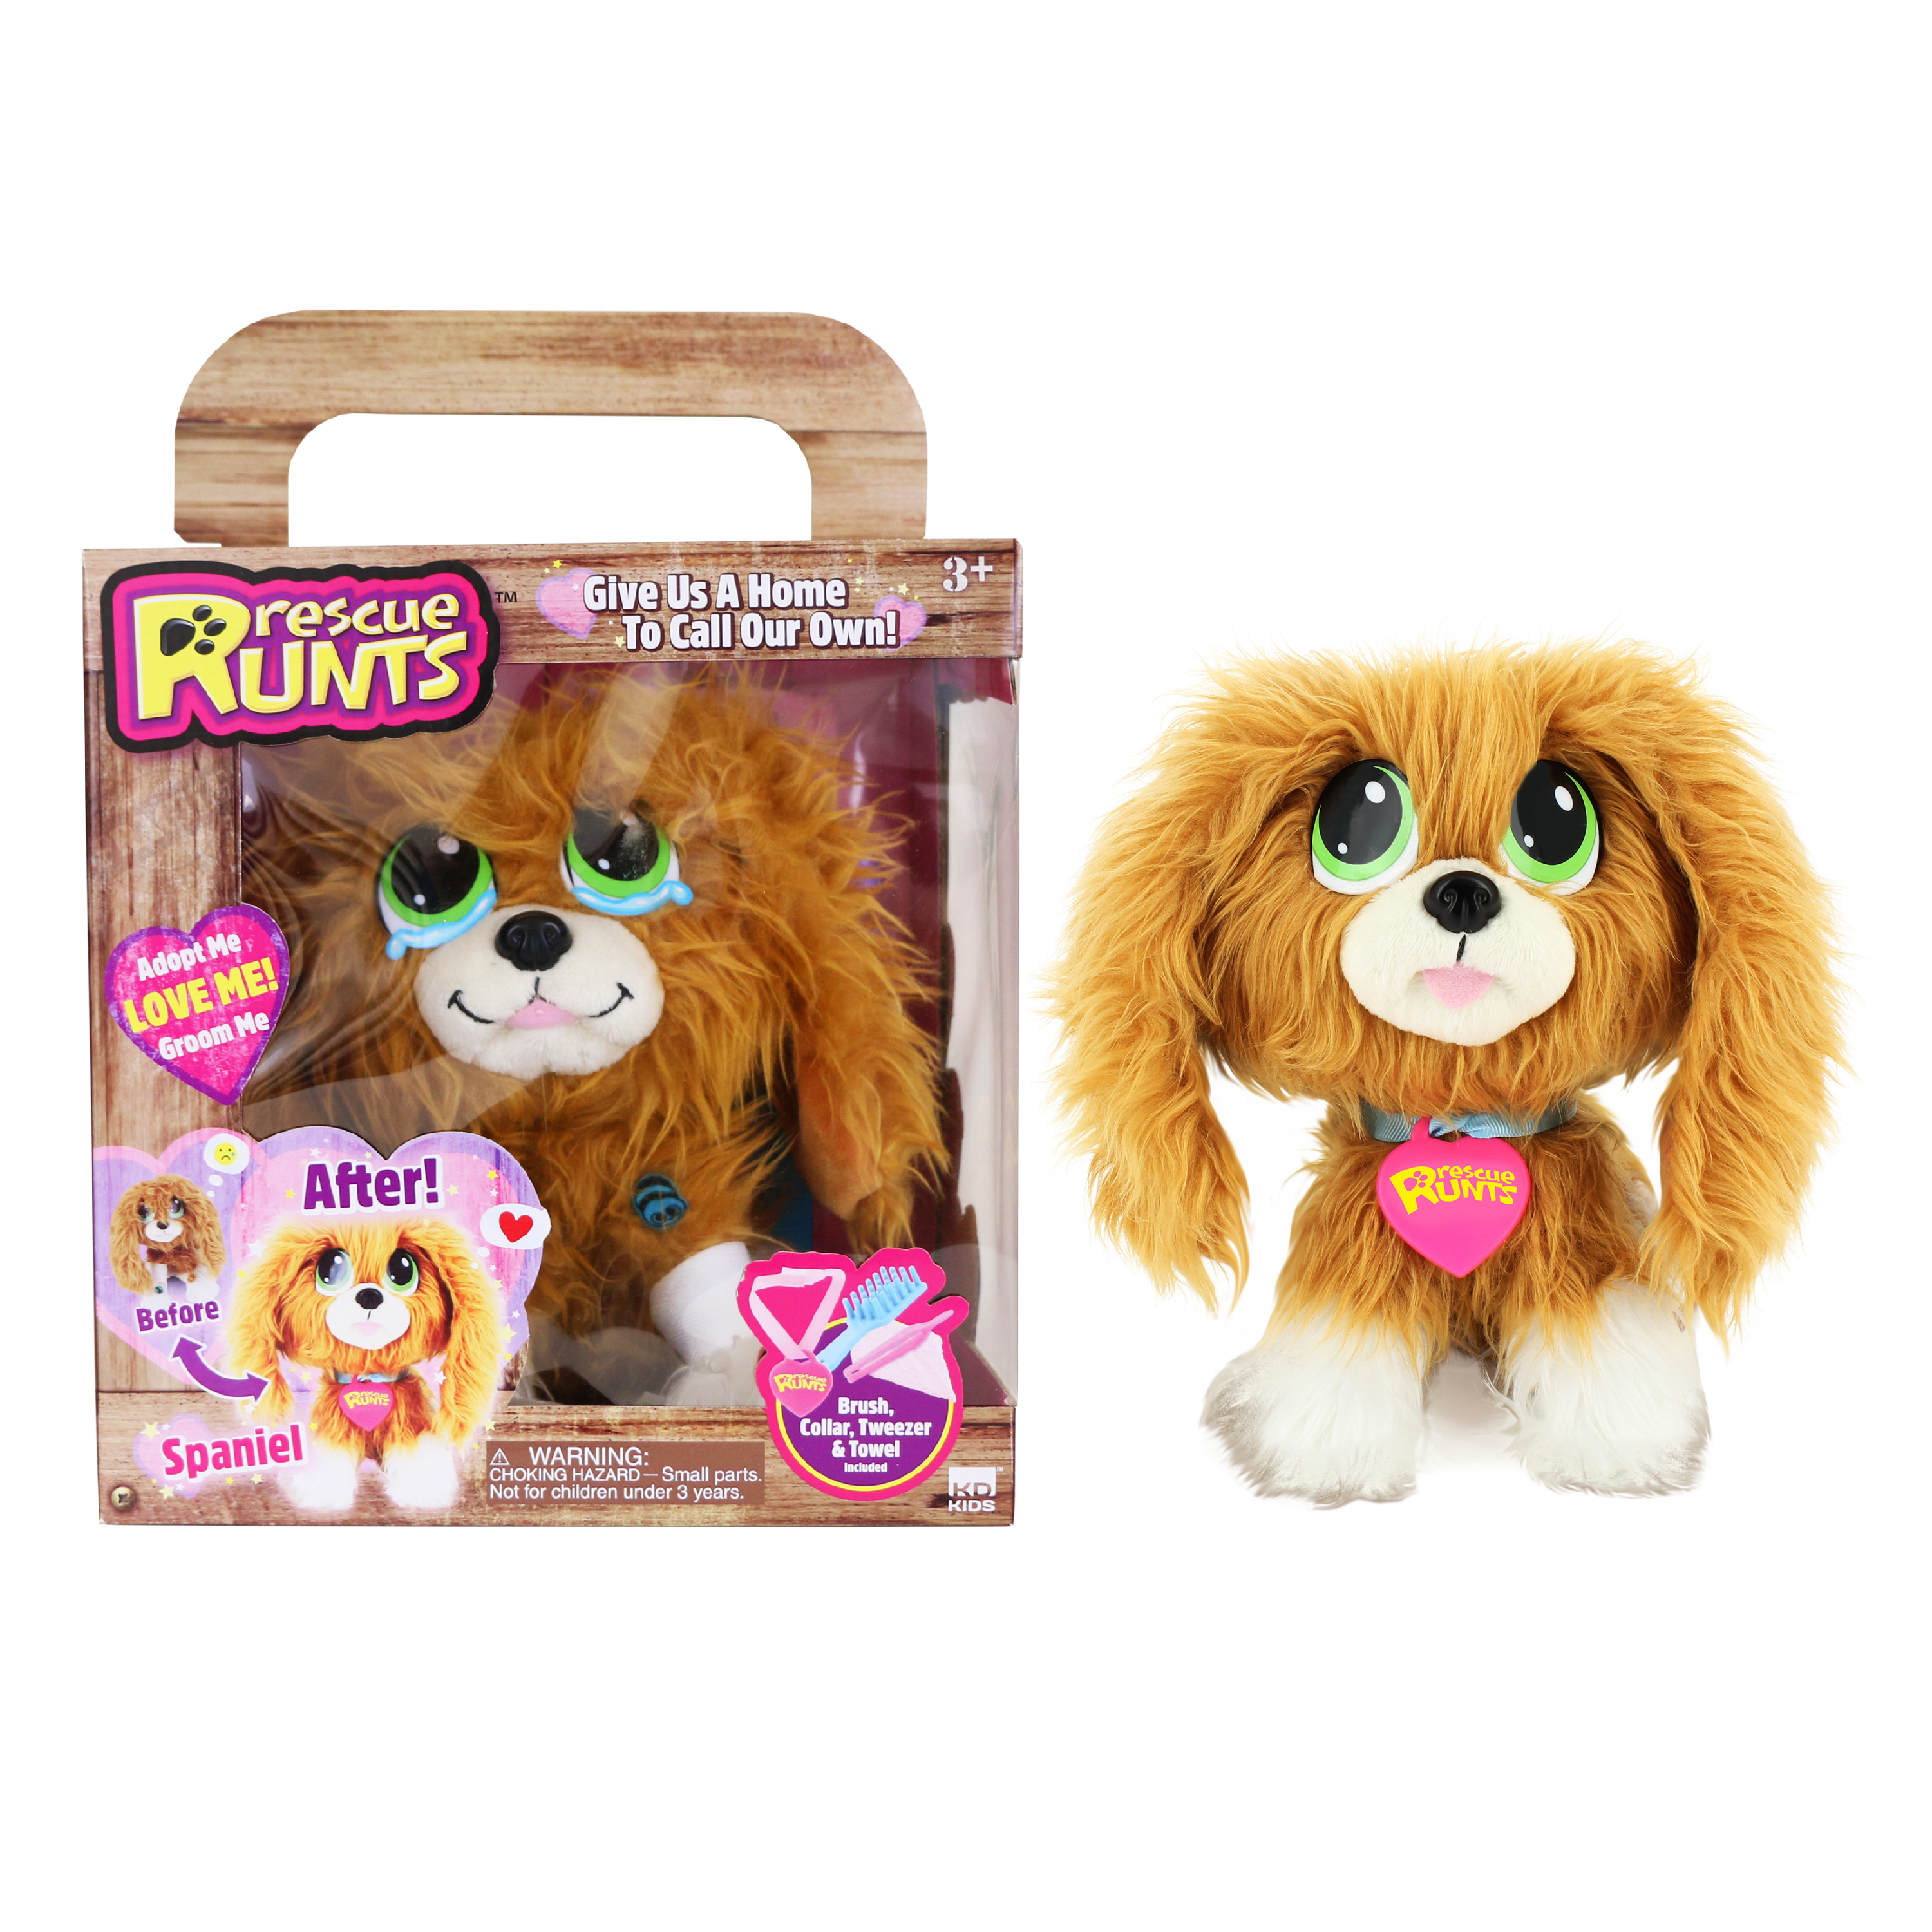 Rescue runts - spaniel - rescue dog plush by kd kids - image 1 of 8